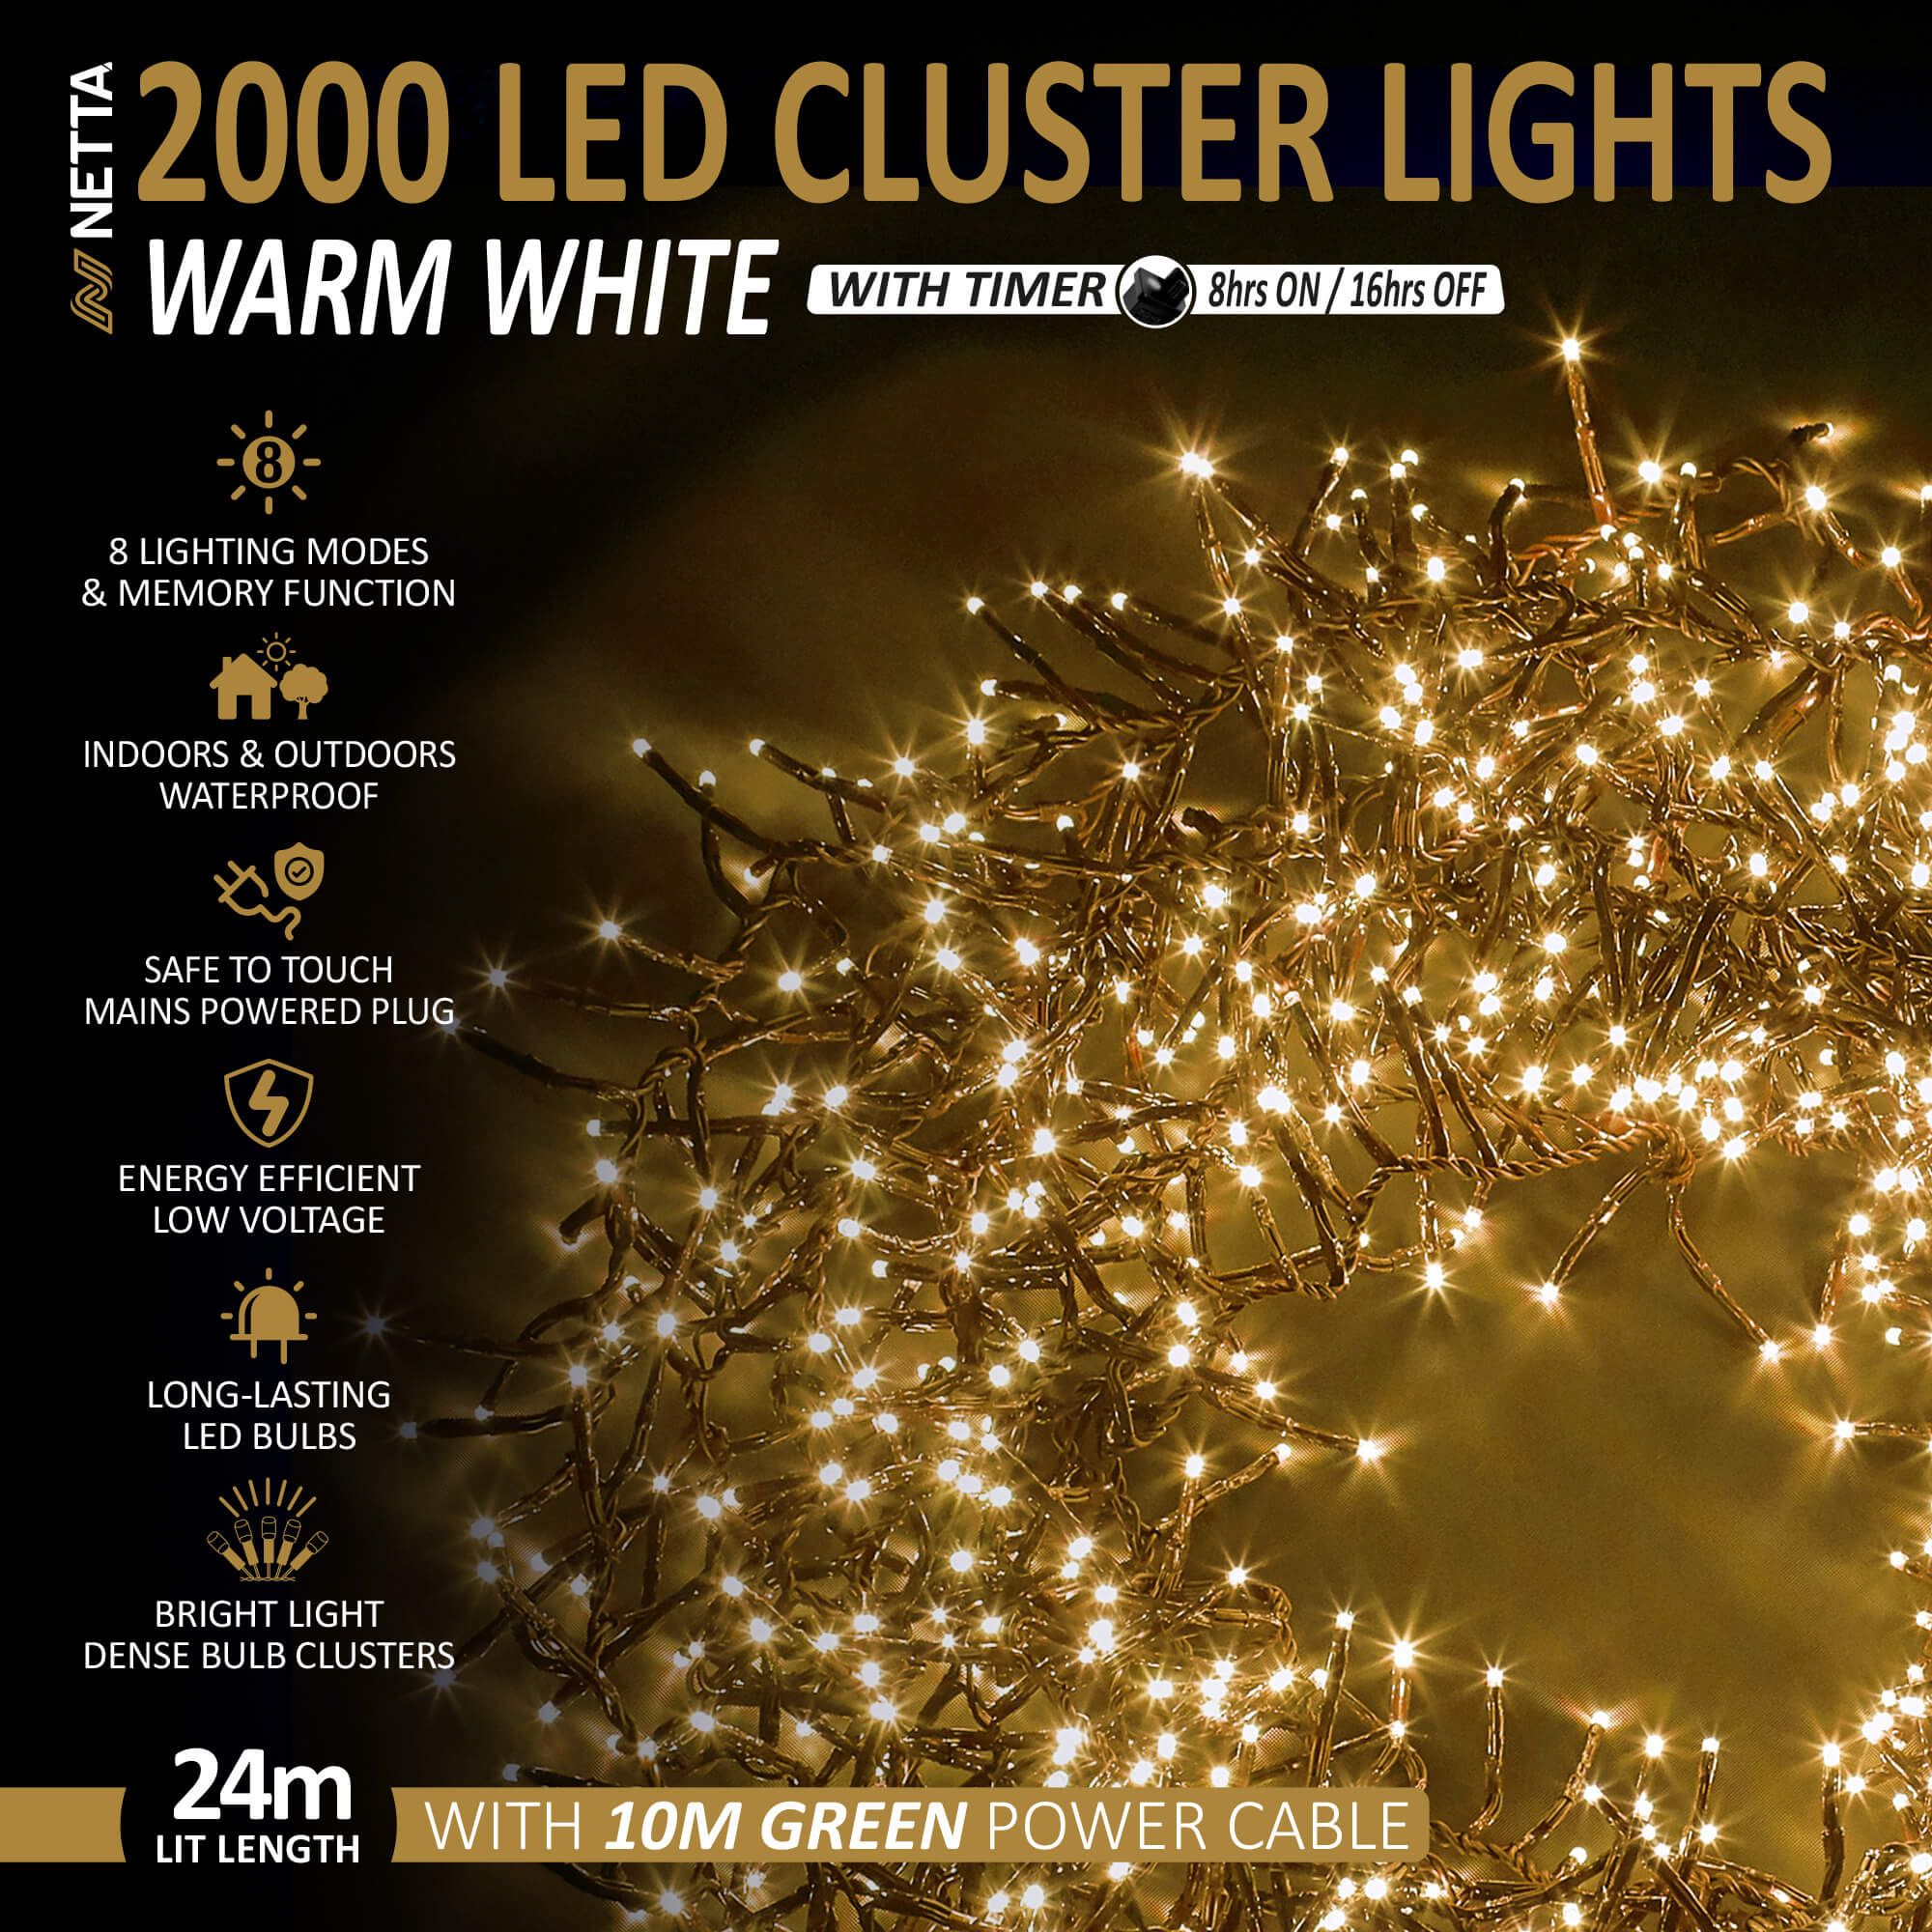 NETTA 2000 LED 24M Cluster String Lights Outdoor and Indoor Plug In - Warm White